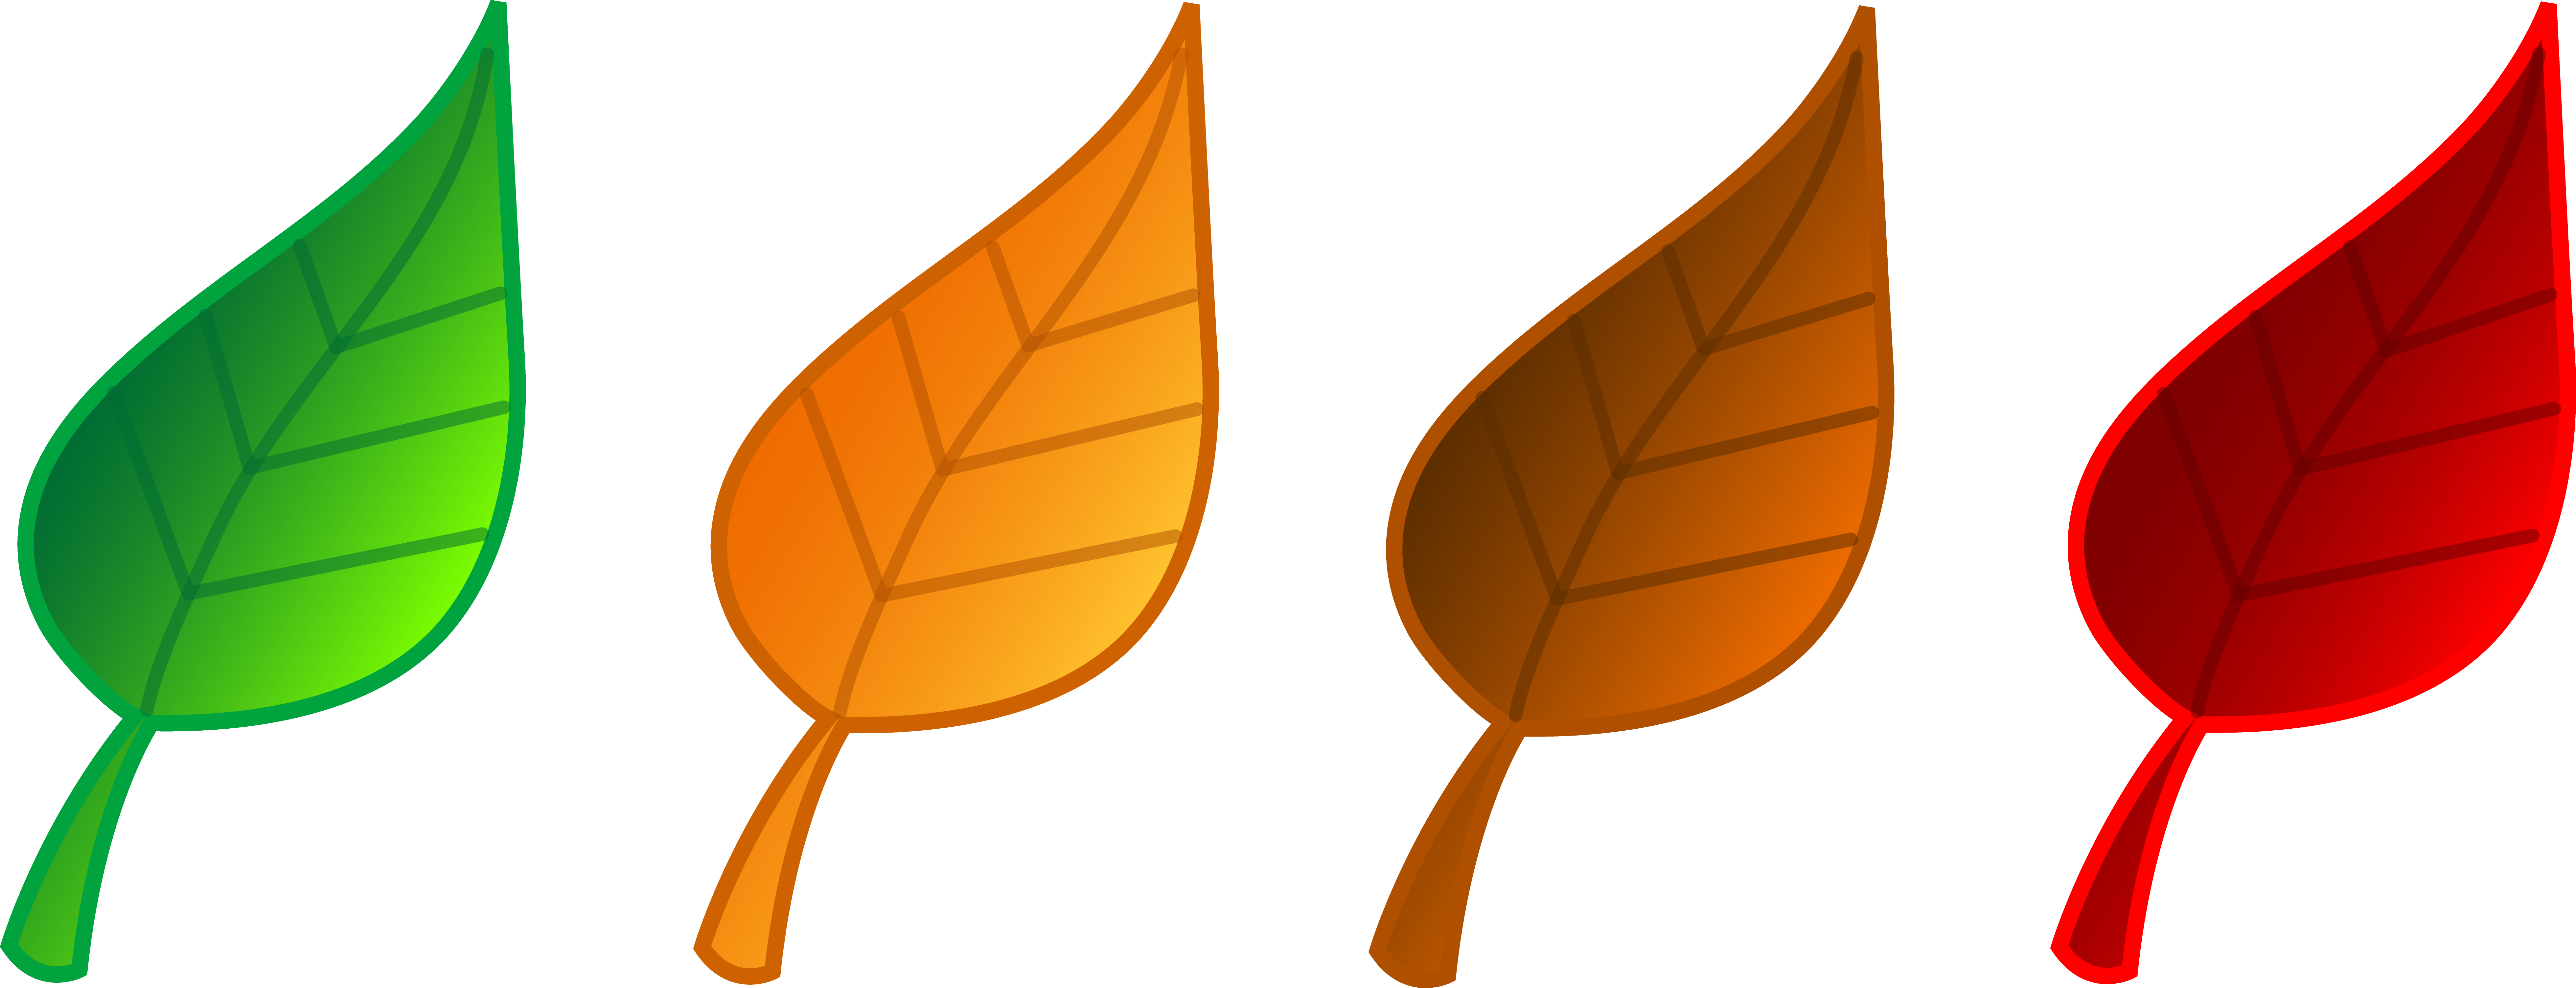 Fall leaves fall leaf clipart free clipart image Clip Art Library